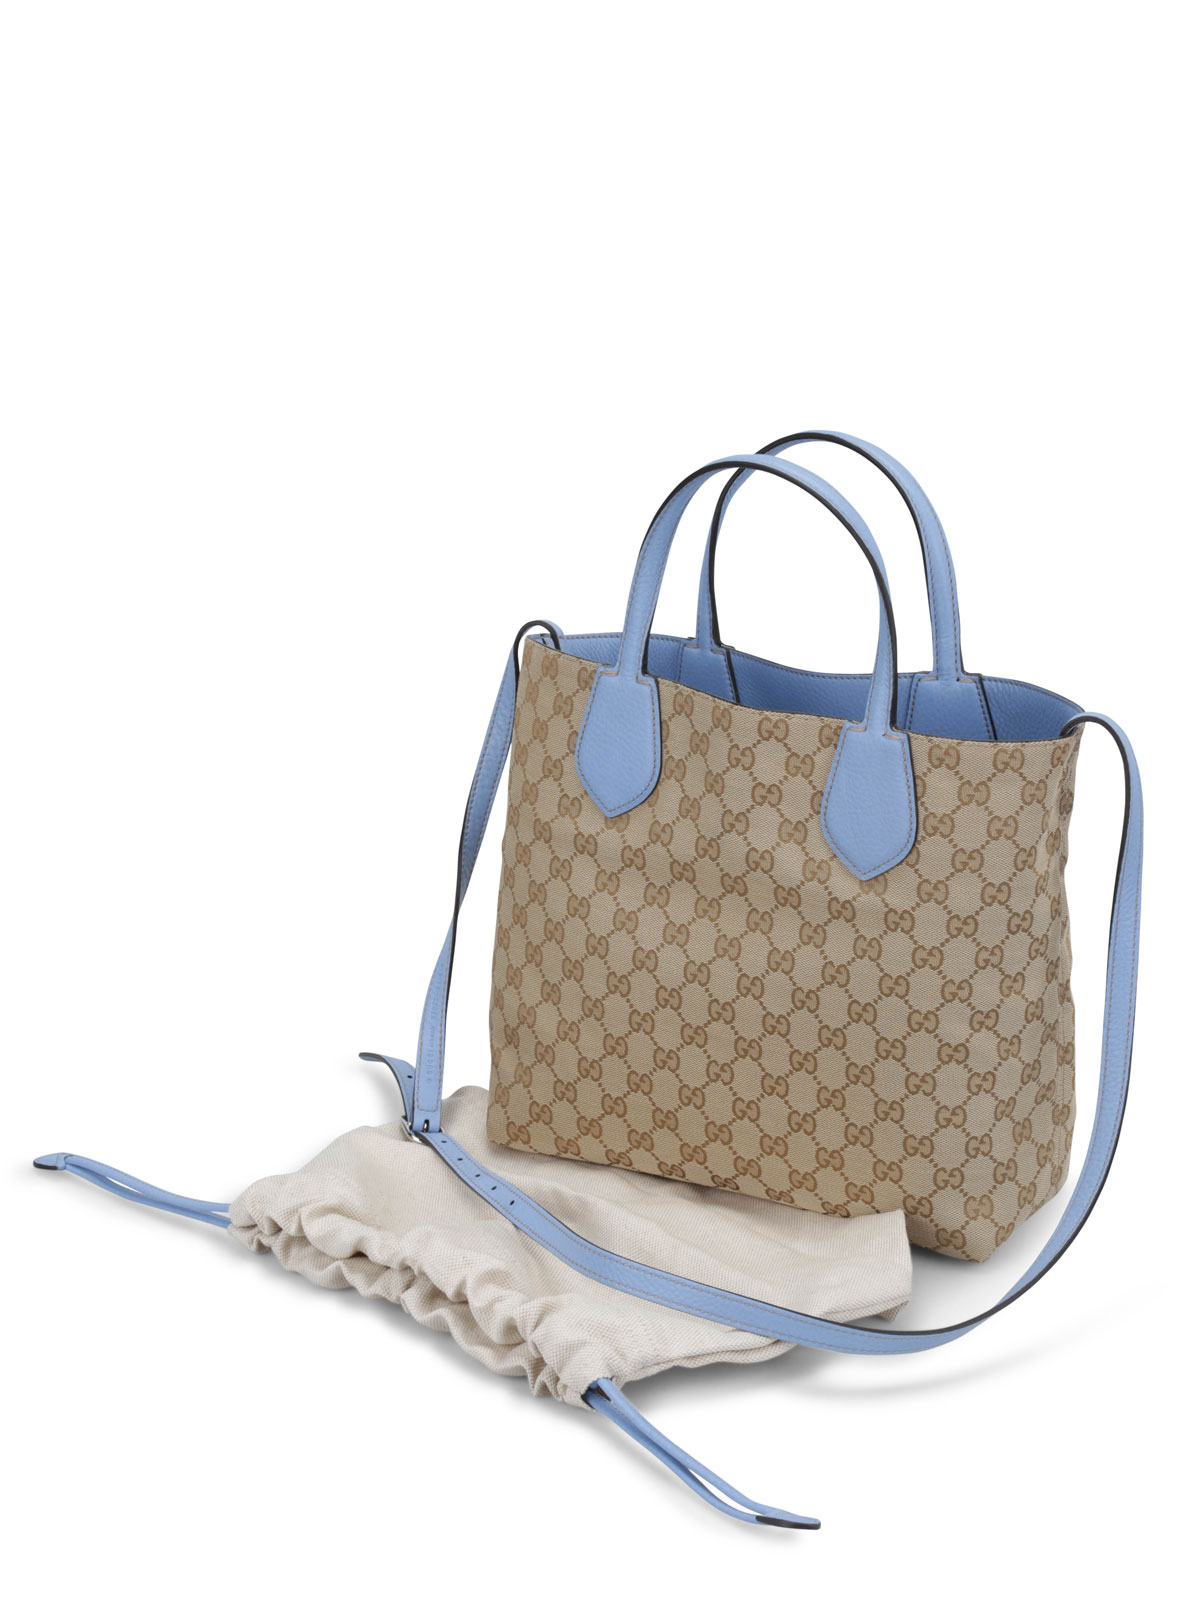 Gucci - Reversible GG fabric Ramble tote - totes bags - 370825 A88FN 4561